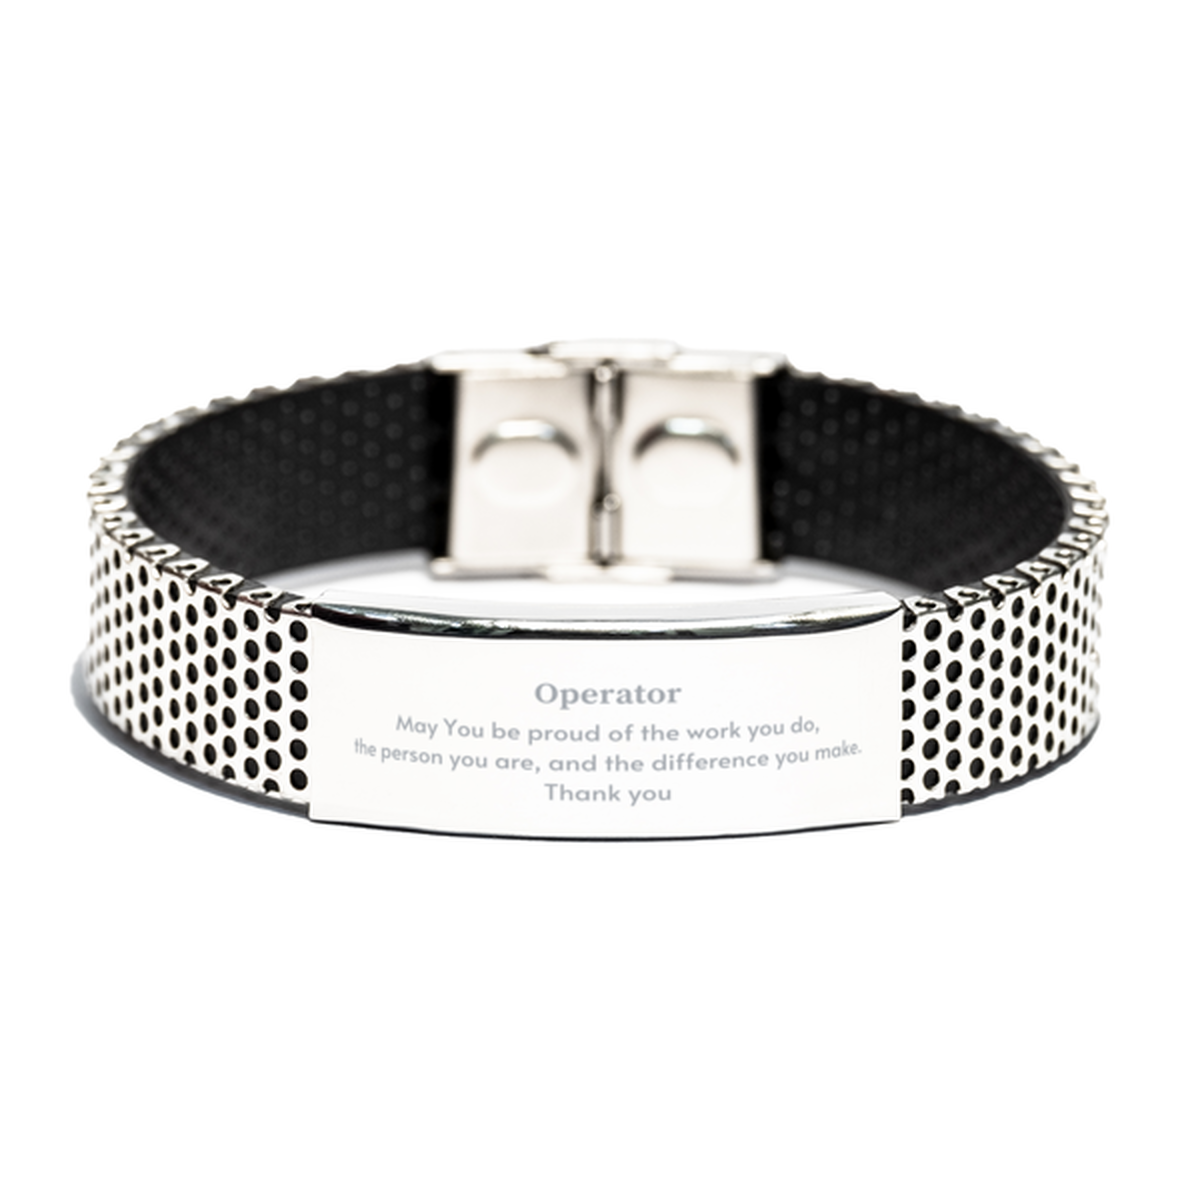 Heartwarming Stainless Steel Bracelet Retirement Coworkers Gifts for Operator, Operator May You be proud of the work you do, the person you are Gifts for Boss Men Women Friends